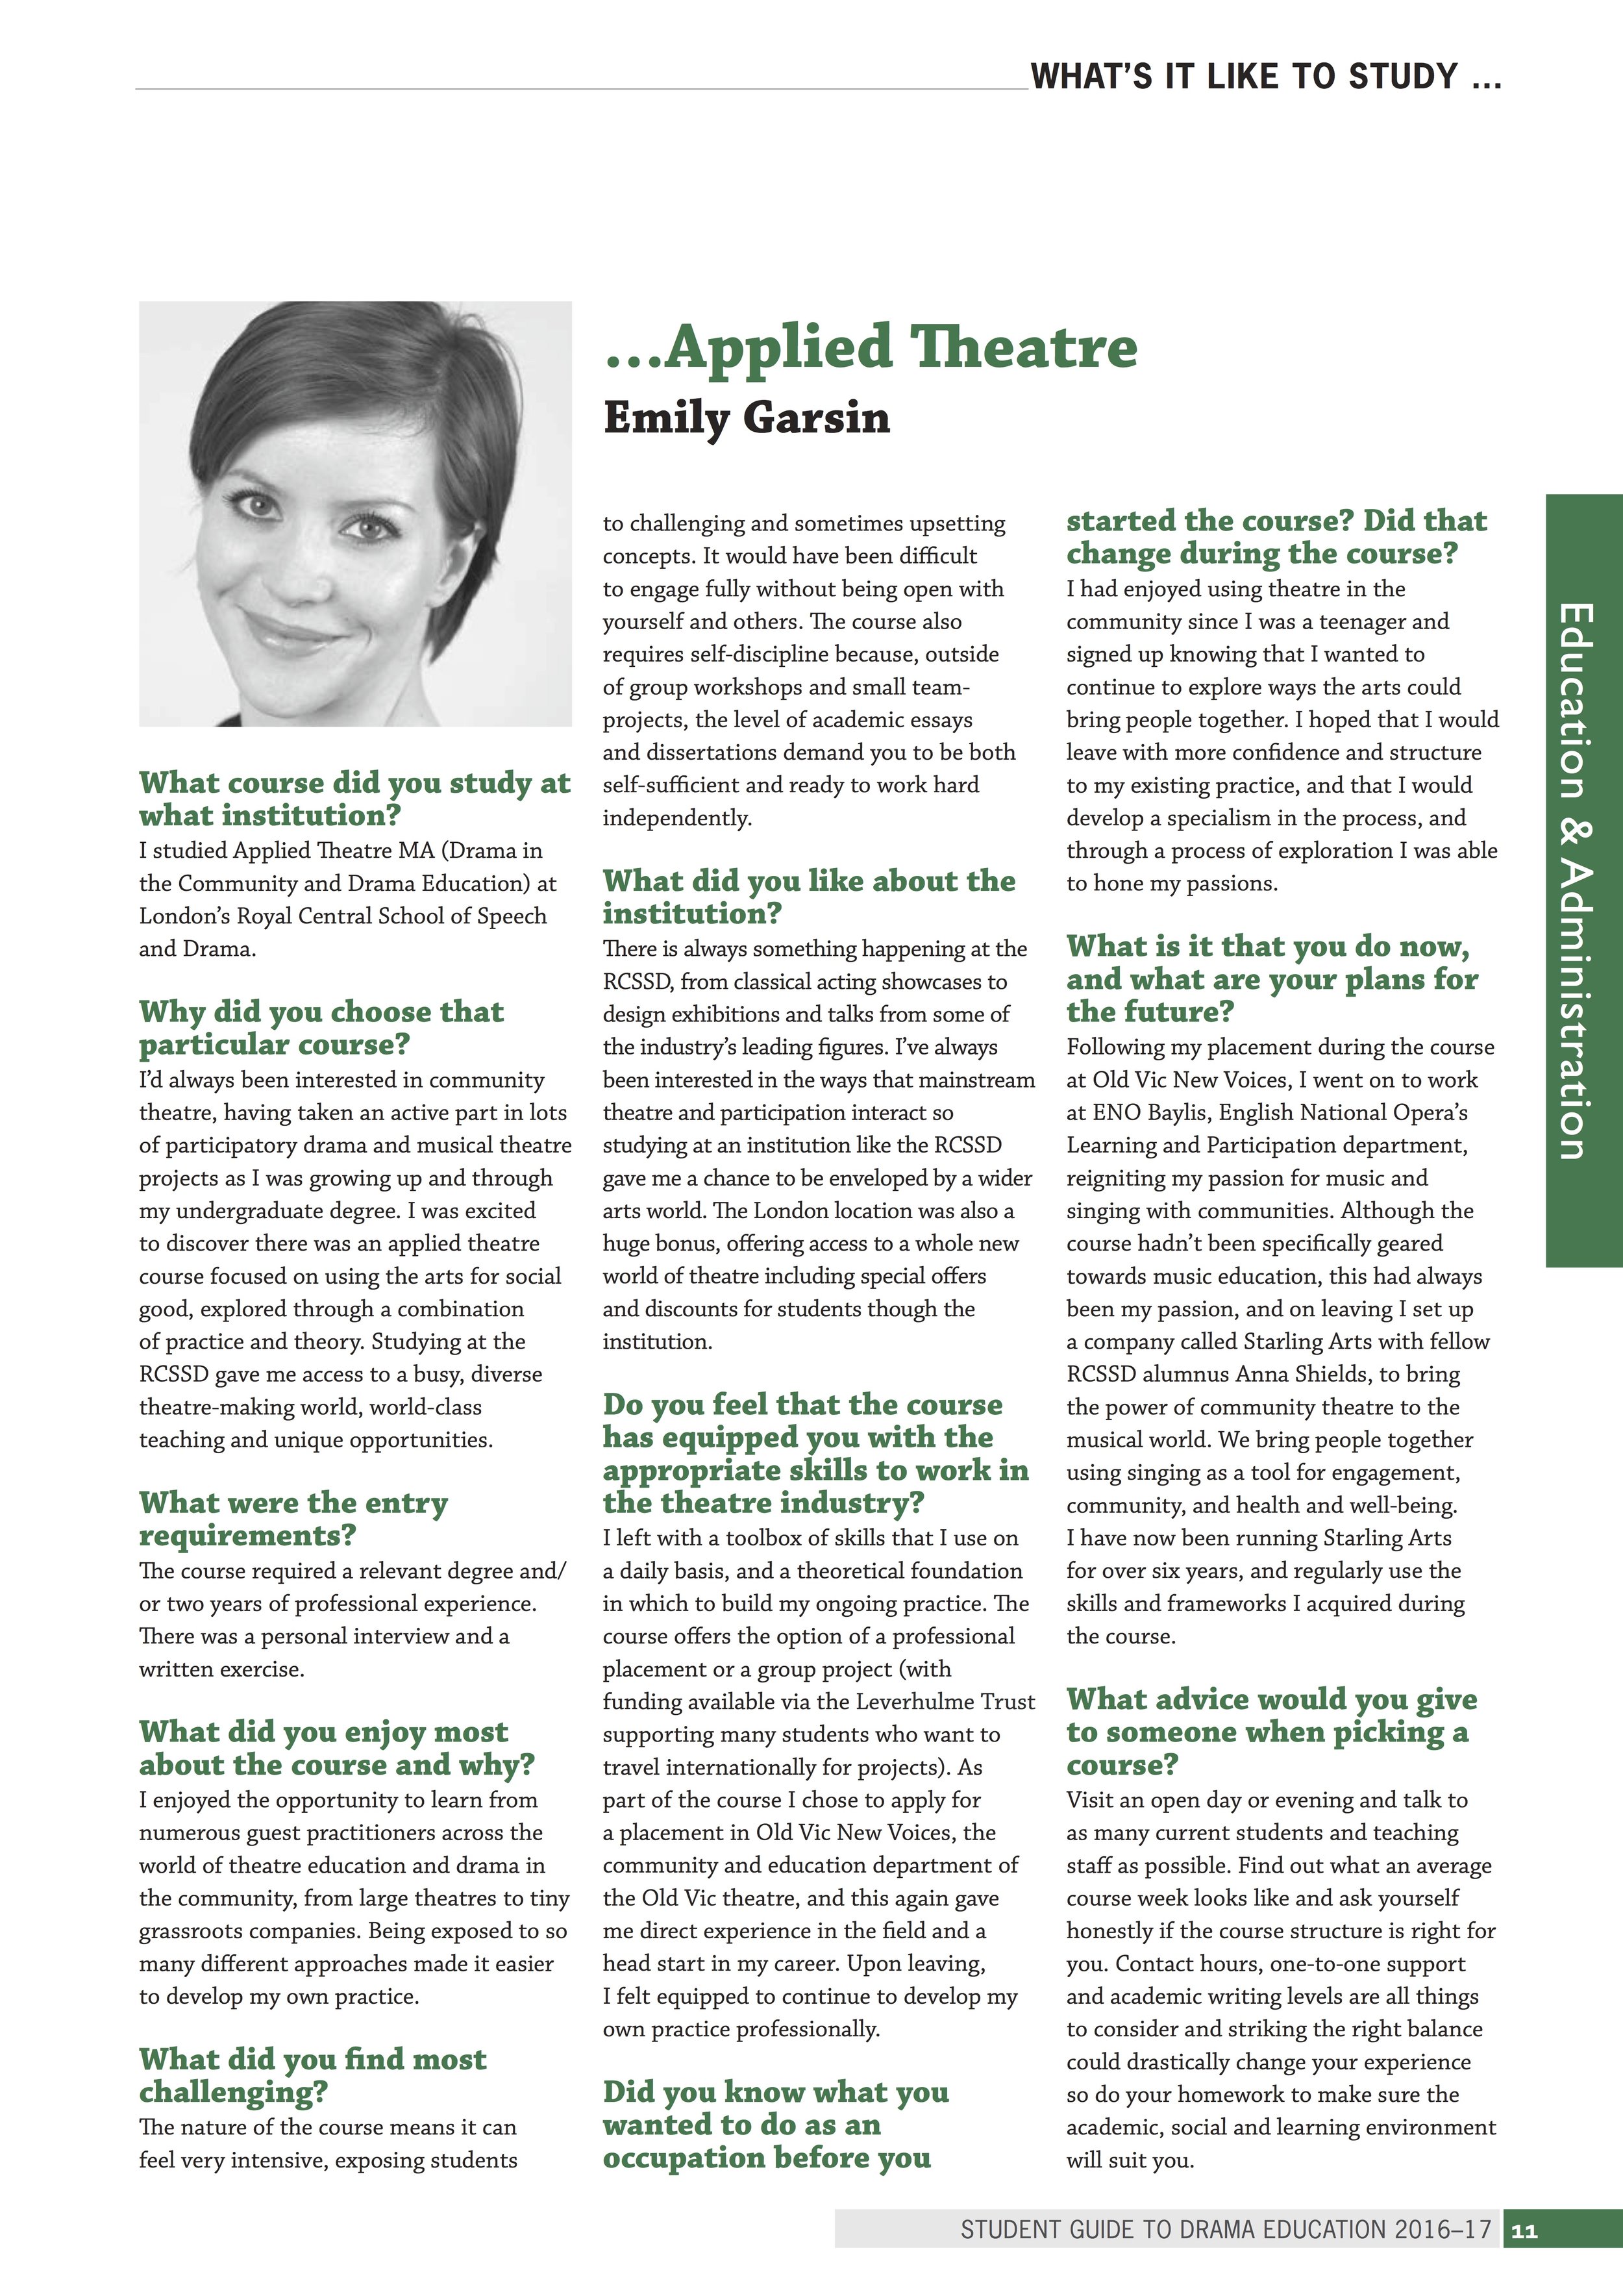 Feature on Emily's training in the Drama Education Guide